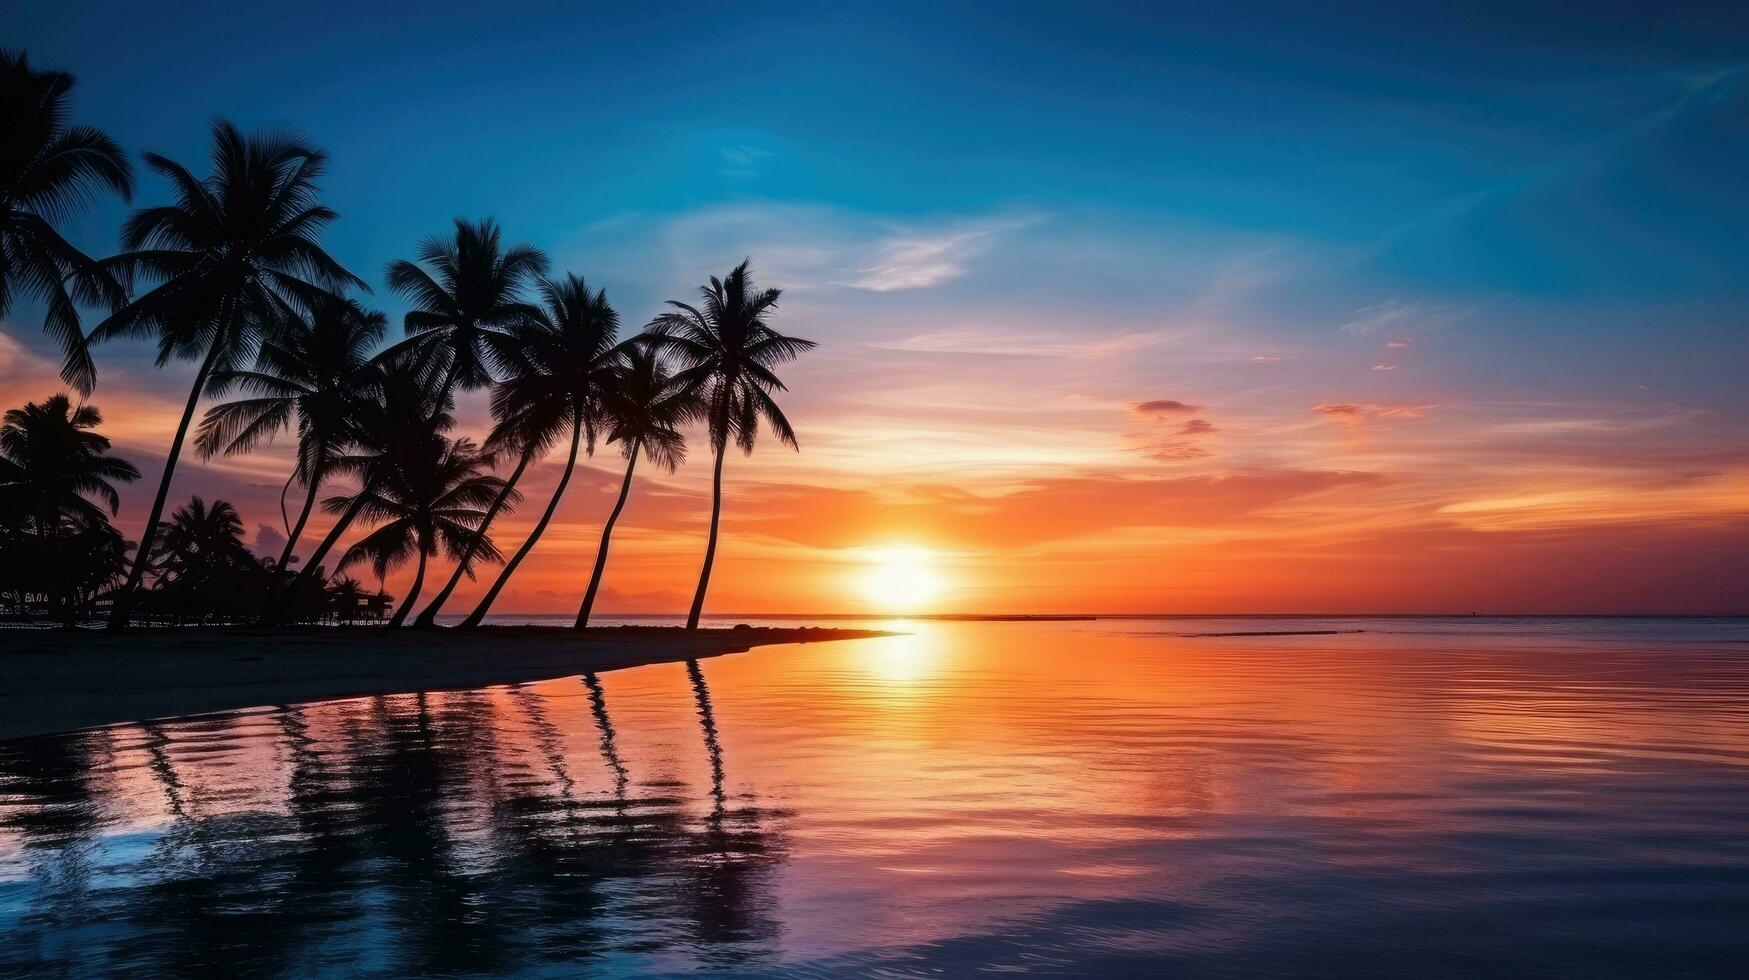 Palm trees silhouette against a stunning background of a tropical sunset beach photo